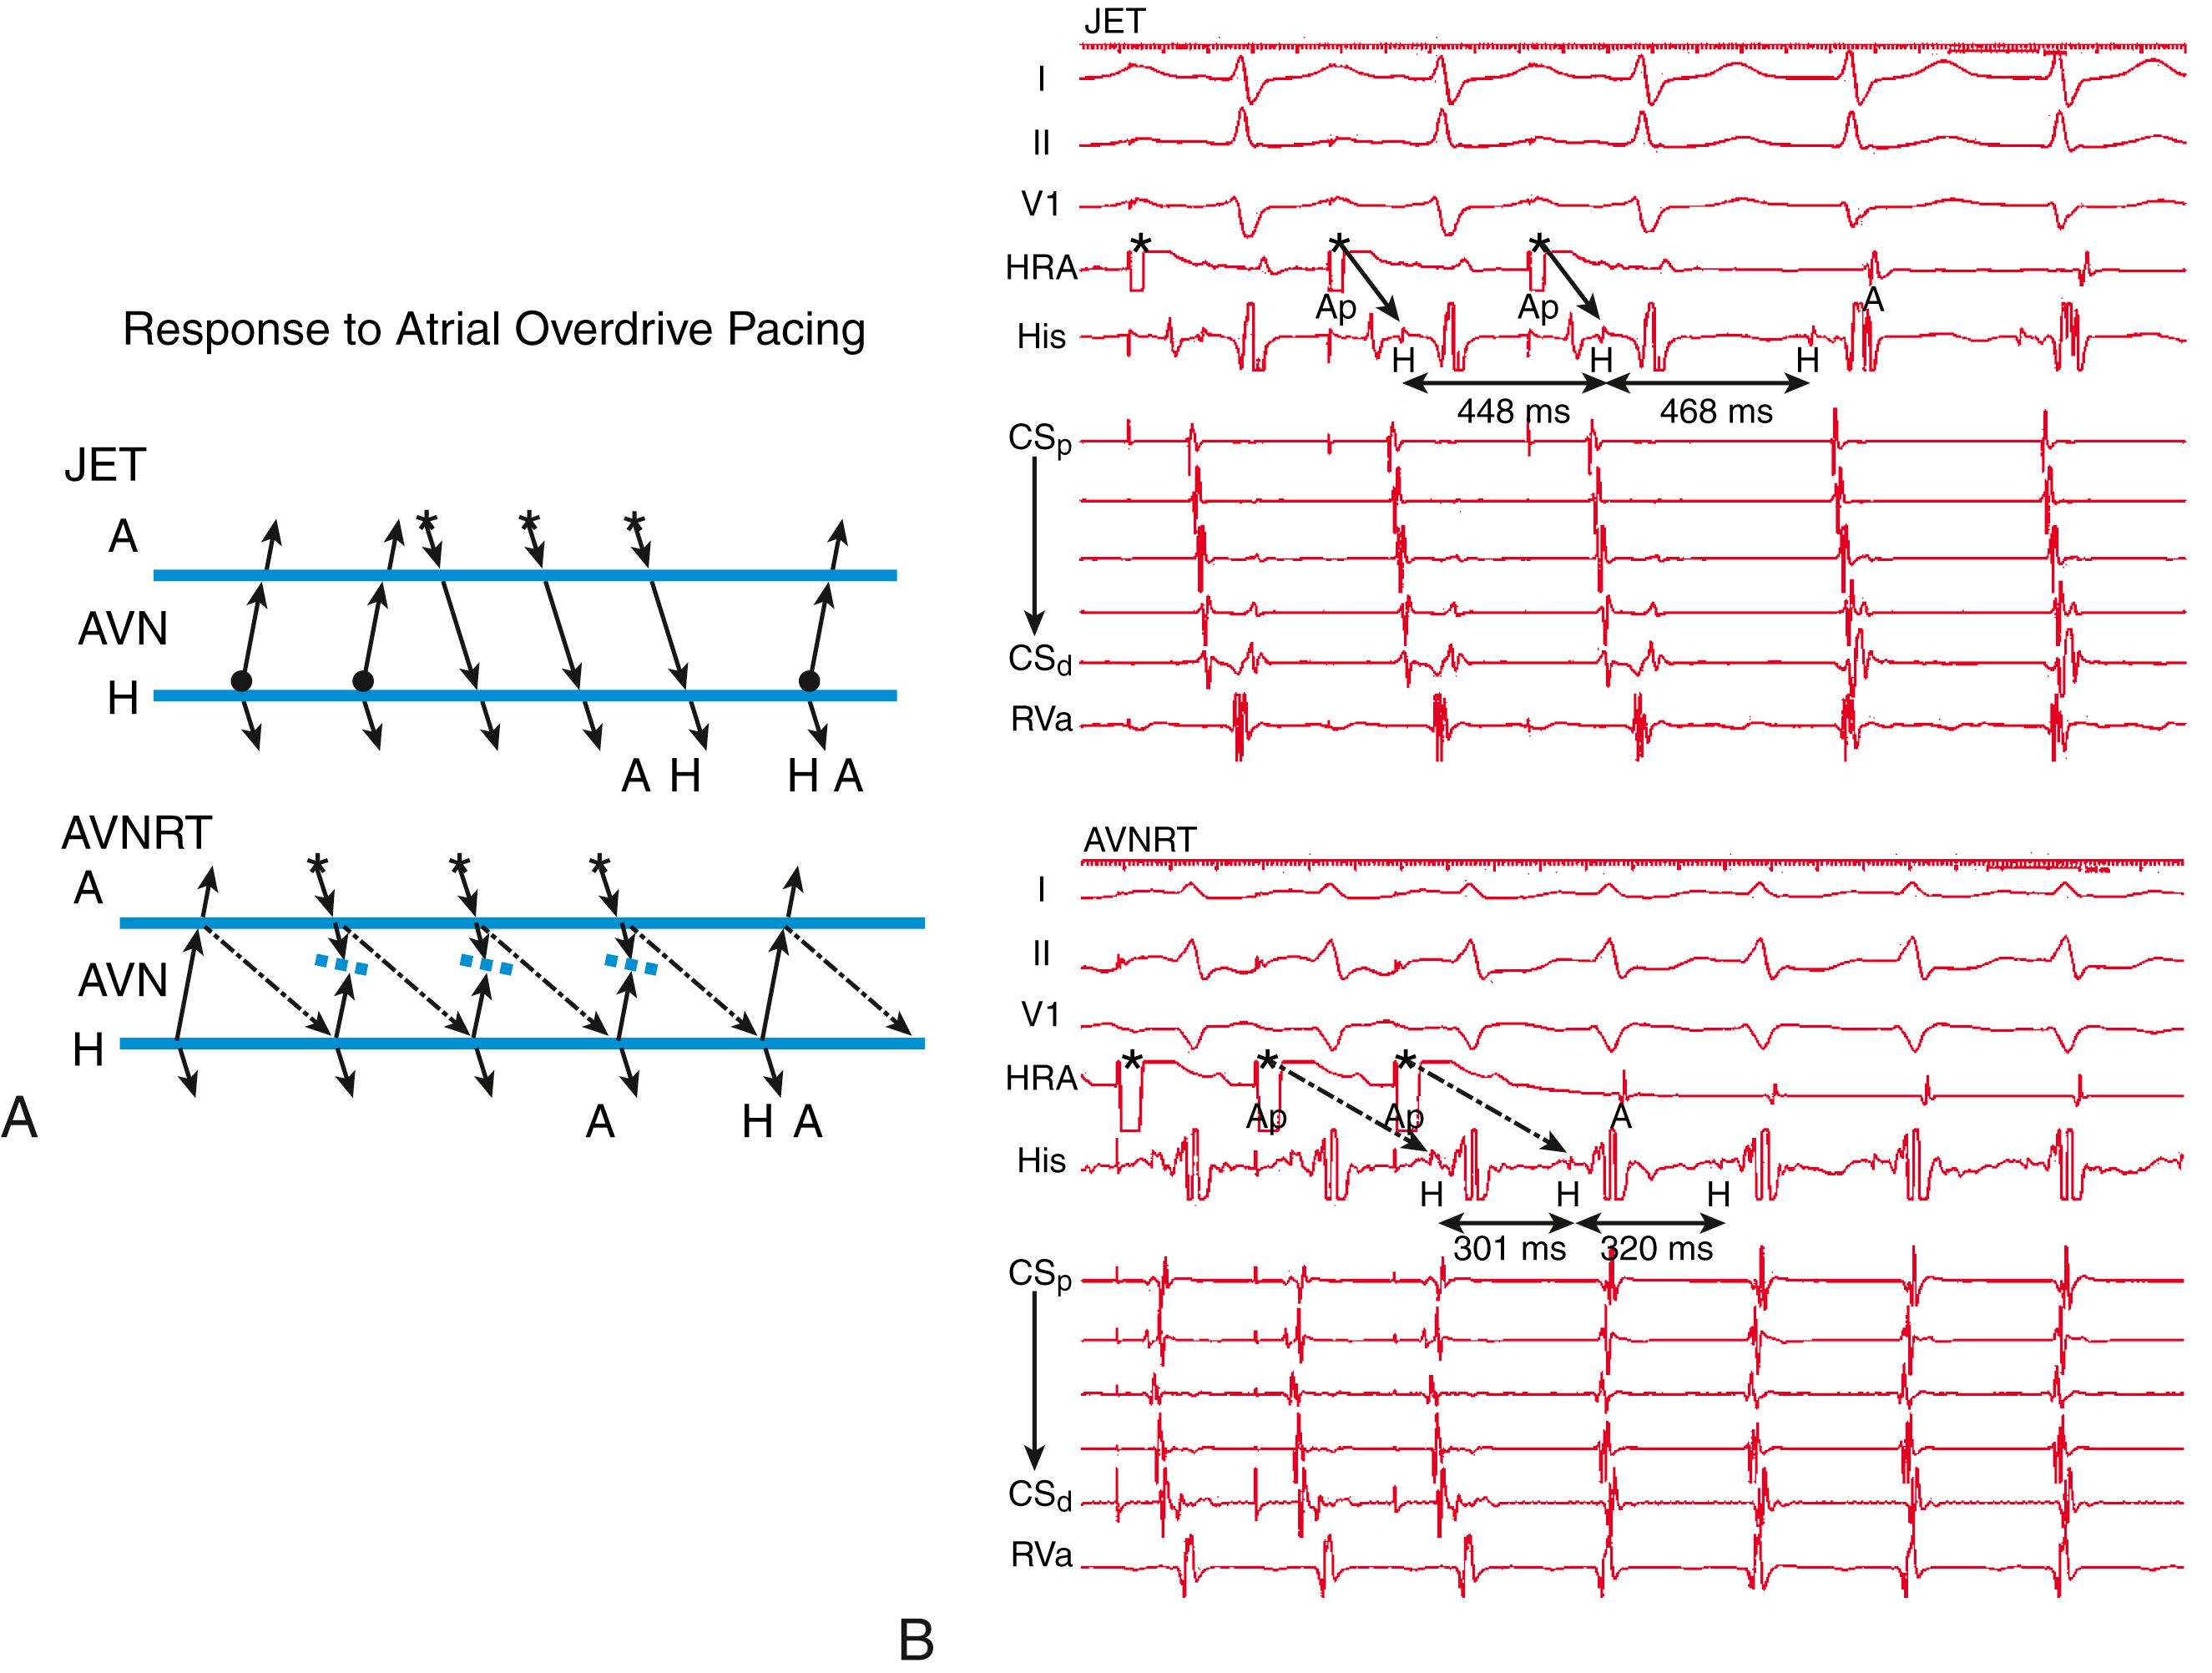 Fig. 73.1, Atrial overdrive pacing to differentiate junctional ectopic tachycardia (JET) from atrioventricular nodal reentrant tachycardia (AVNRT).